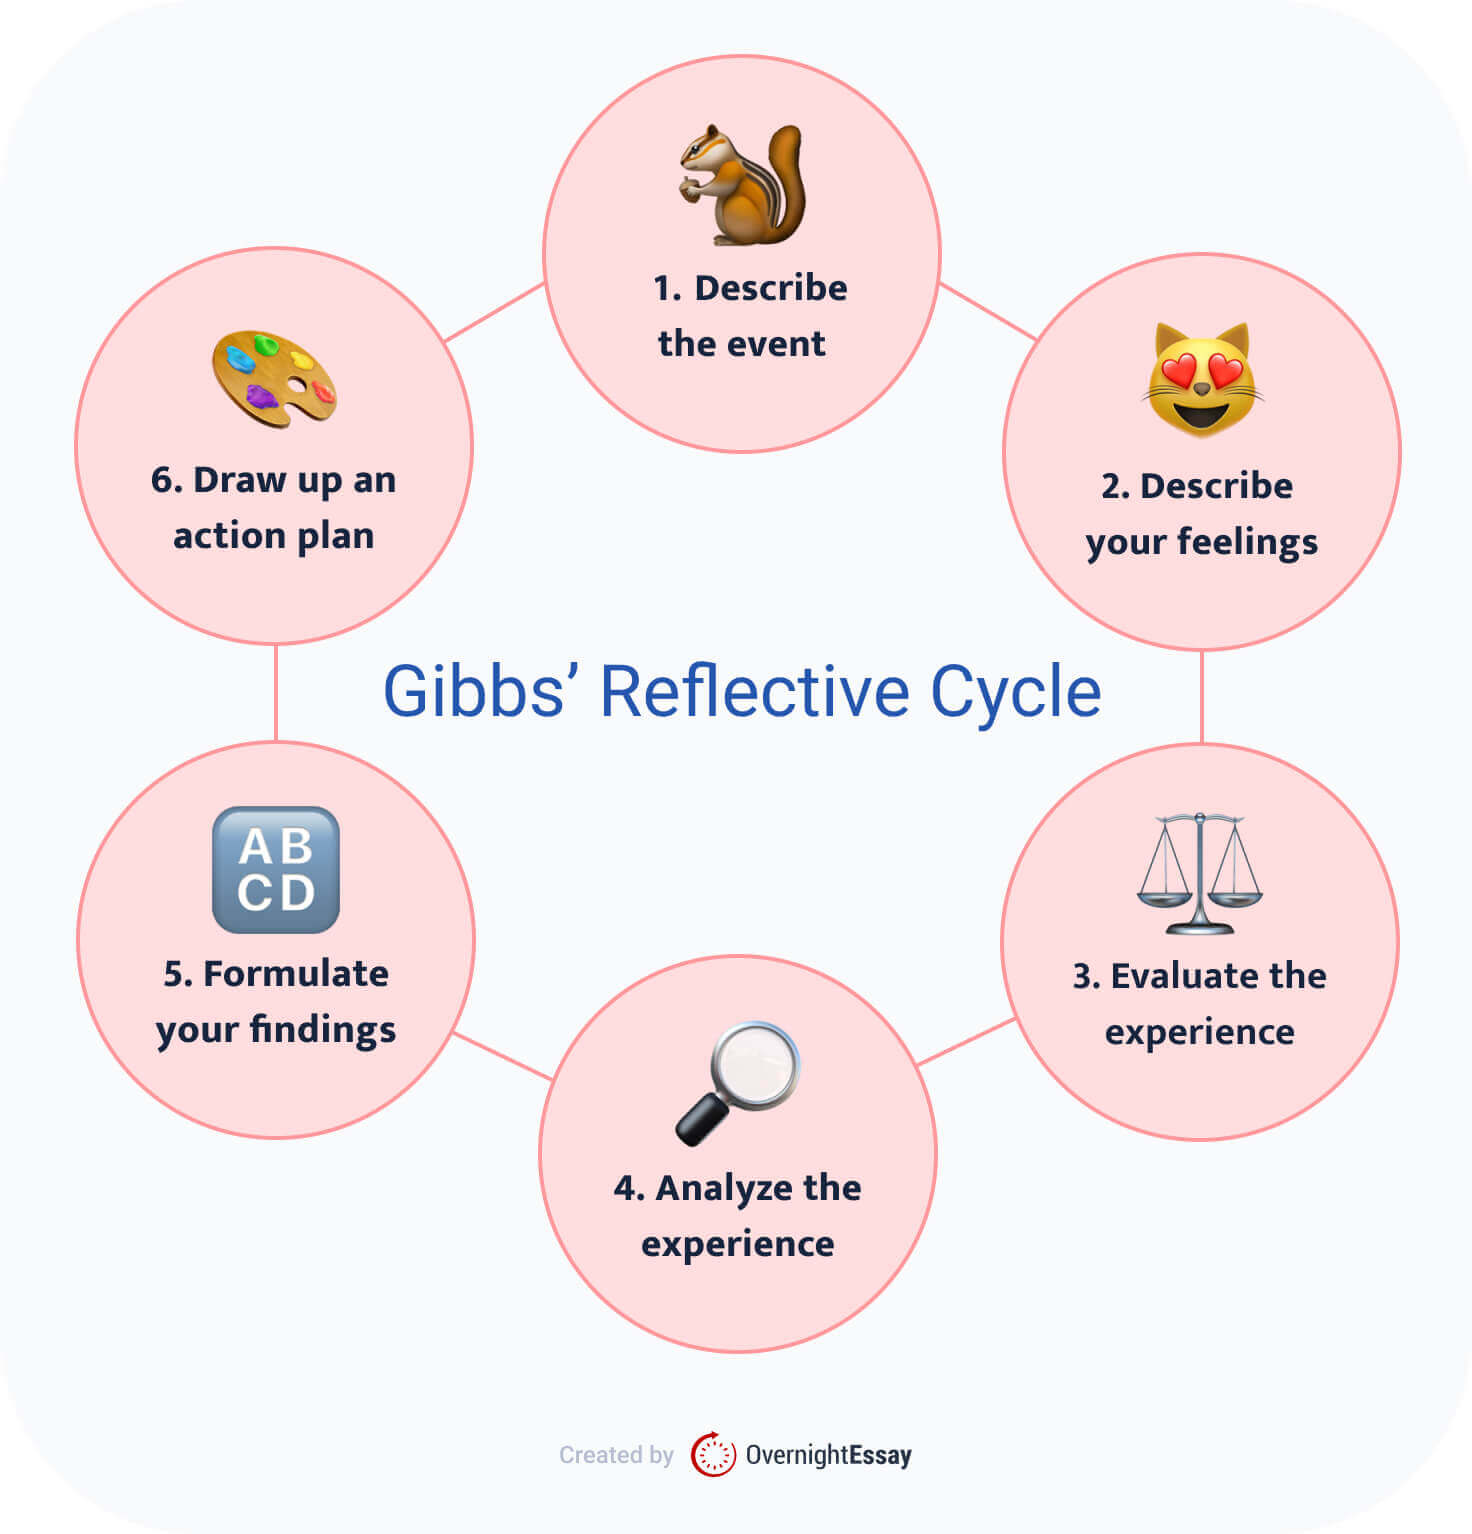 The picture illustrates the 6 stages of Gibbs' reflective cycle.